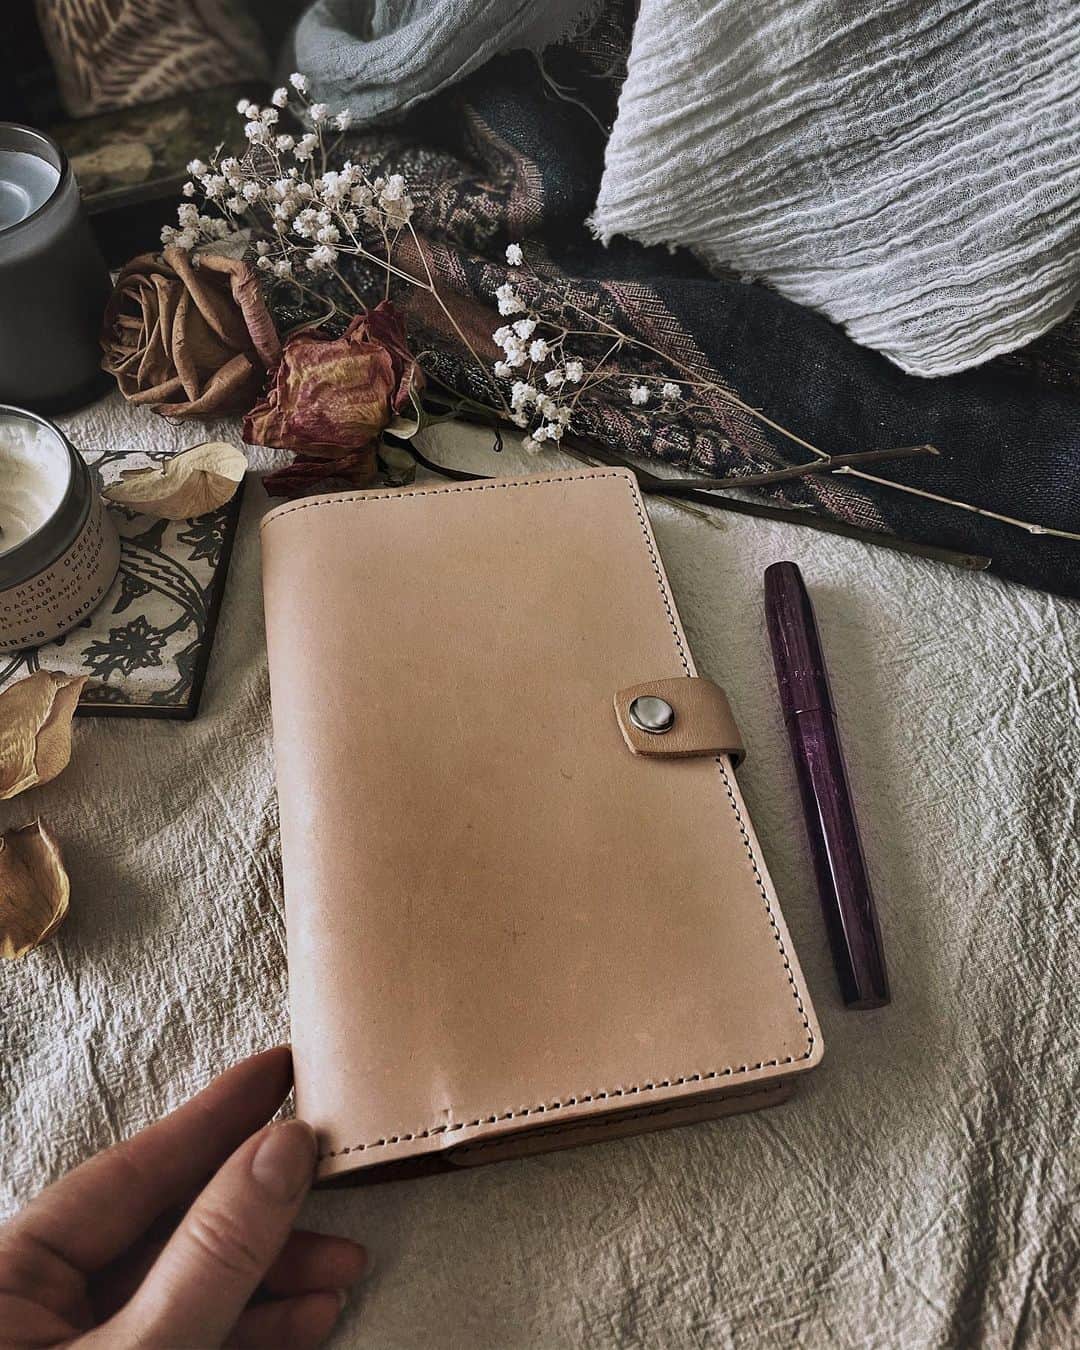 Catharine Mi-Sookさんのインスタグラム写真 - (Catharine Mi-SookInstagram)「A hearty welcome to the weekend and a commencement of a new bullet journal with the theme of wellness, growth and joy as we greet an upcoming solstice and new year ahead. My first pages are penned with a list by my favorite boundary expert @nedratawwab whose grounding posts I look forward to reading daily. This one is called Intentions For 2021: . • I am resting more. • I am not allowing anyone to talk me into reviving unhealthy relationships. • I will not question my gut; I will listen closely the first time. • I will take chances in my best interest. • I am not sharing my joy with people who won’t reciprocate my energy. • I will combat my tendency to personalize my experiences with others. • I will say “no” instead of pacifying people by saying “maybe.” • I am showing up as my full, authentic self, no matter the setting. • I am leaning more into my needs and tending to myself. • I am giving up on convincing people about who I am. . Intentions for 2021 list by @nedratawwab. . . Do any of these resonate with you? Which ones? . . . . Creative space: Model 46 SE Blackberry Fountain Pen @franklinchristoph. B6 Leather Notebook Cover @coalcreekleather. B6 Notebook @soumkine. Ephemera & stamp @kiroku.studio. . . . . #bulletjournal #bulletjournalideas #journal #franklinchristoph #fountainpens #selfcaredaily #nedratawwab #coalcreekleather #soumkine #wellnesslifestyle #wellnessjourney #cozyaesthetic #darkacademia #morningpages #bujoideas #plannercommunity #journalinspiration #penmanship #daysofsmallthings #darkandmoody #beautyofstillmoments #hyggelife #yearofcreativehabits #thedailywriting」12月18日 23時11分 - catharinemisook